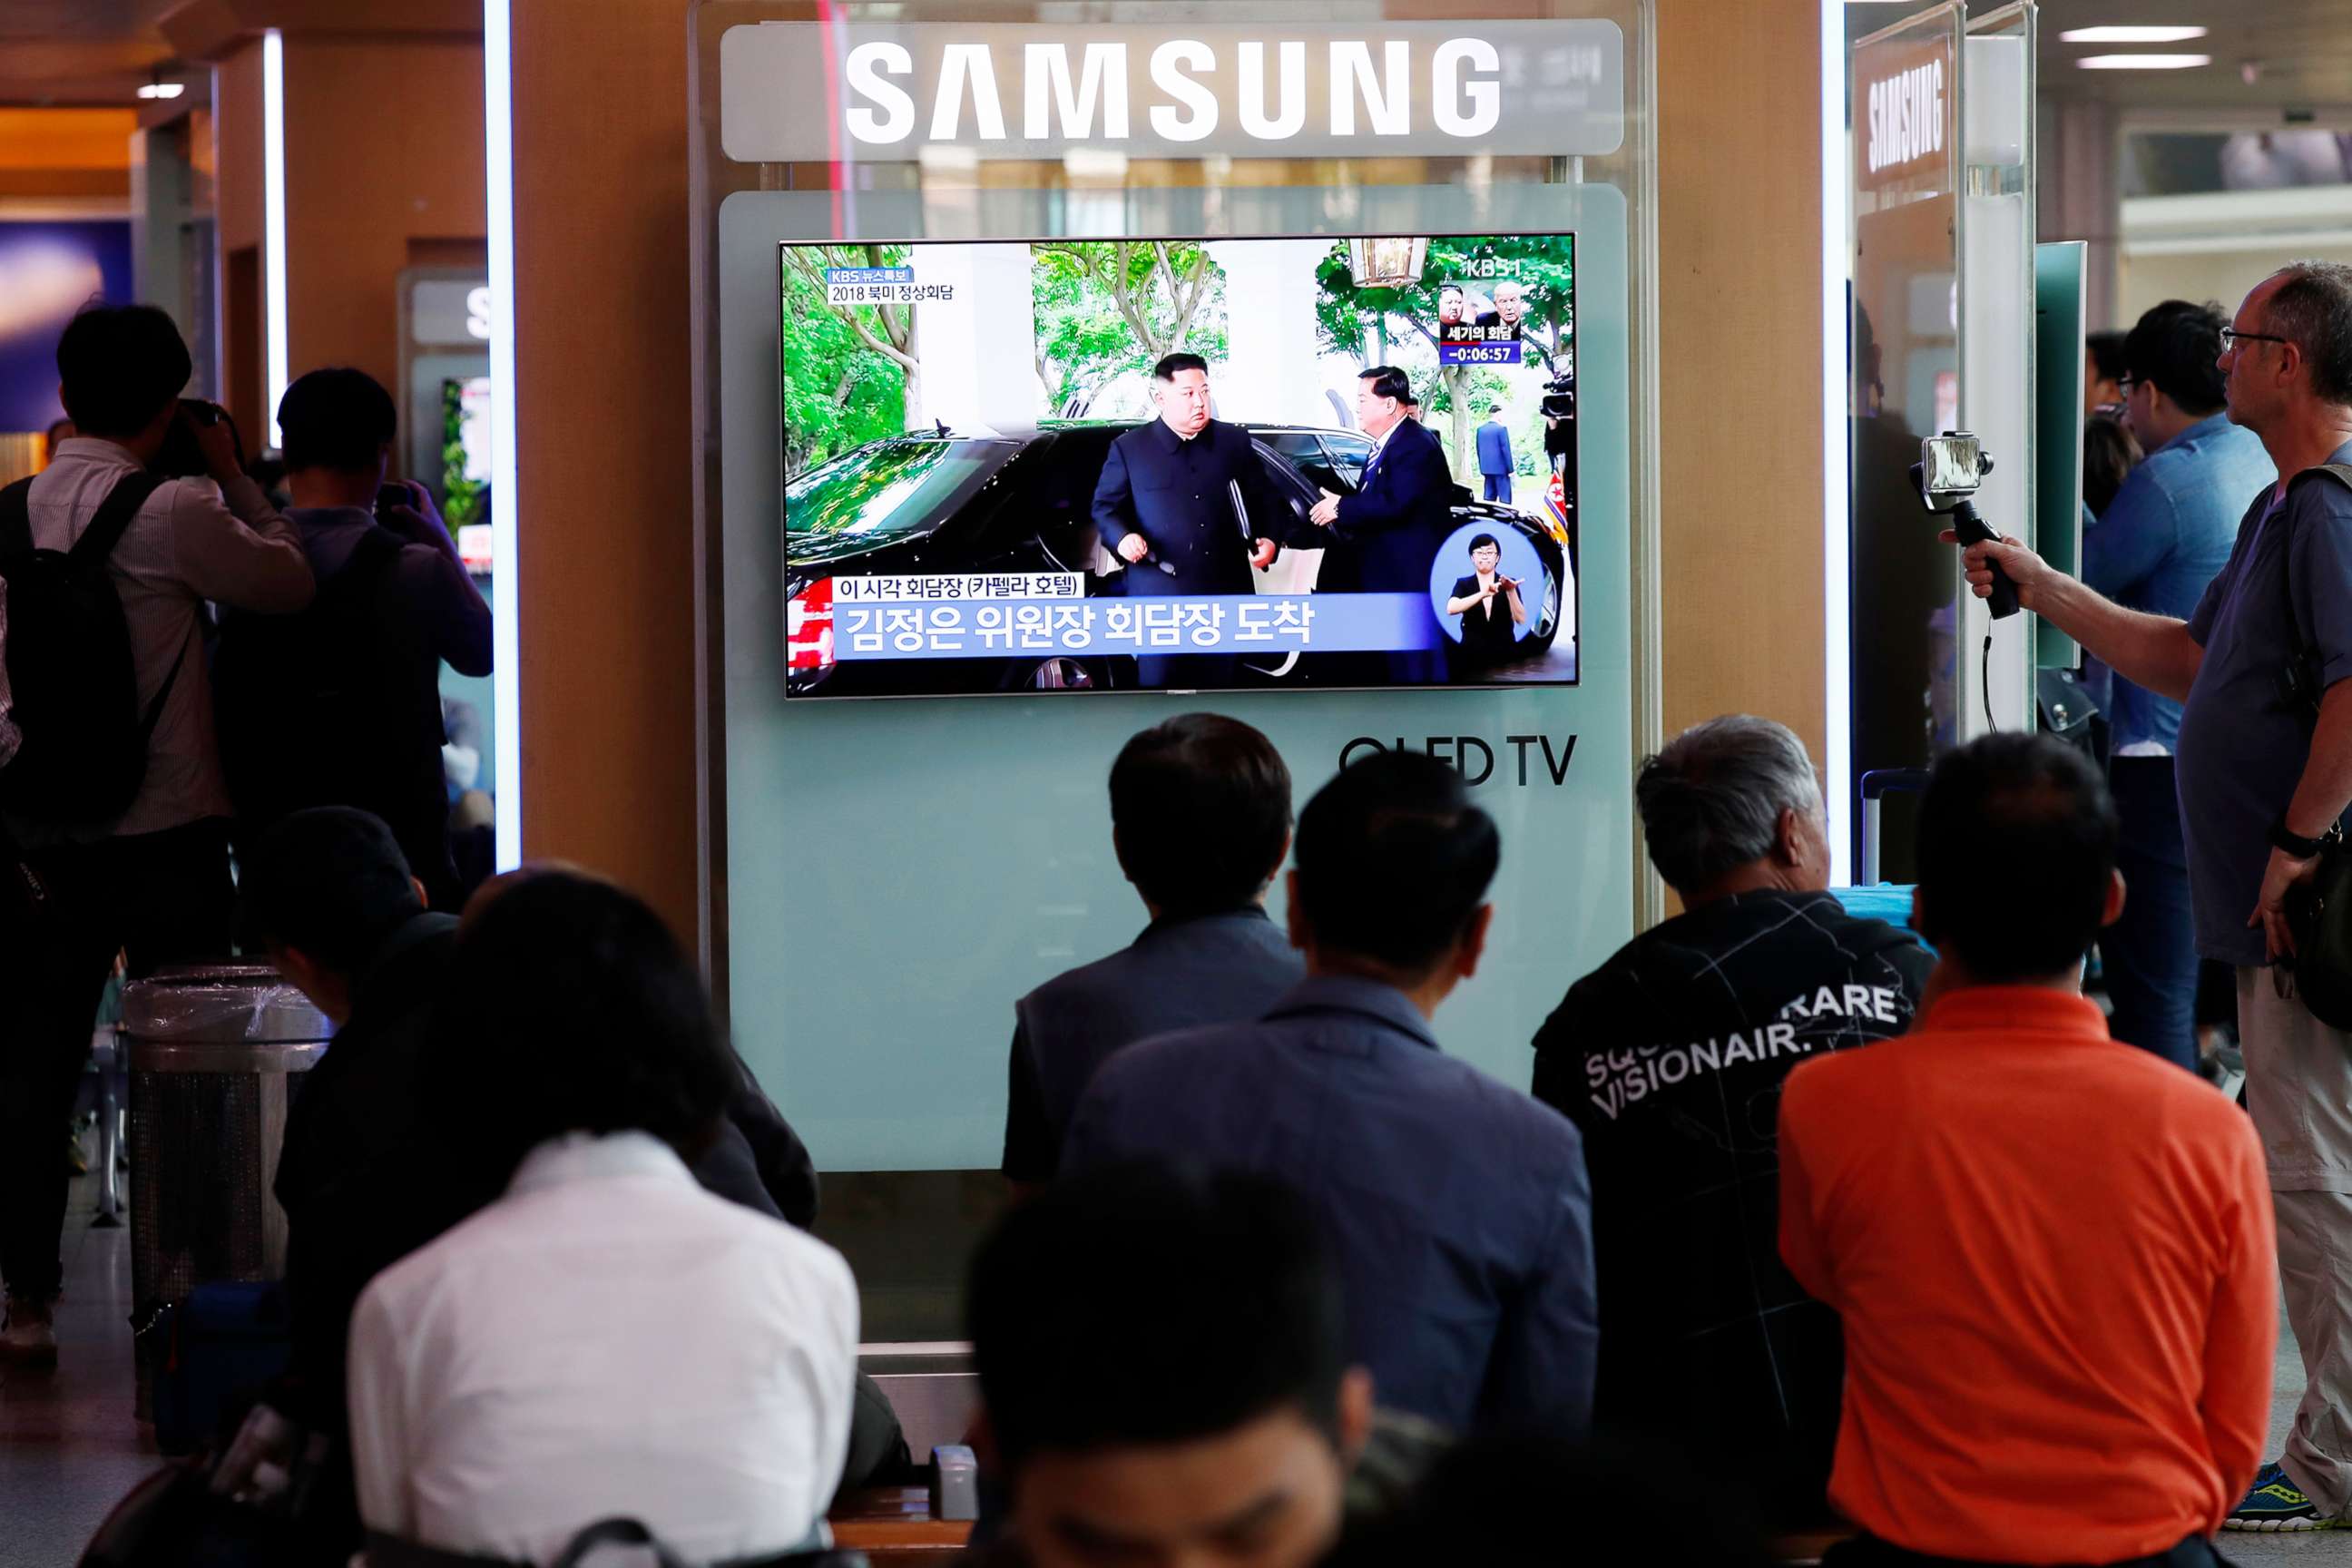 PHOTO: South Koreans watch a TV screen displaying a broadcast of the historic meeting between President Donald J. Trump and North Korean leader Kim Jong-un in Singapore, at a station in Seoul, South Korea, June 12, 2018.